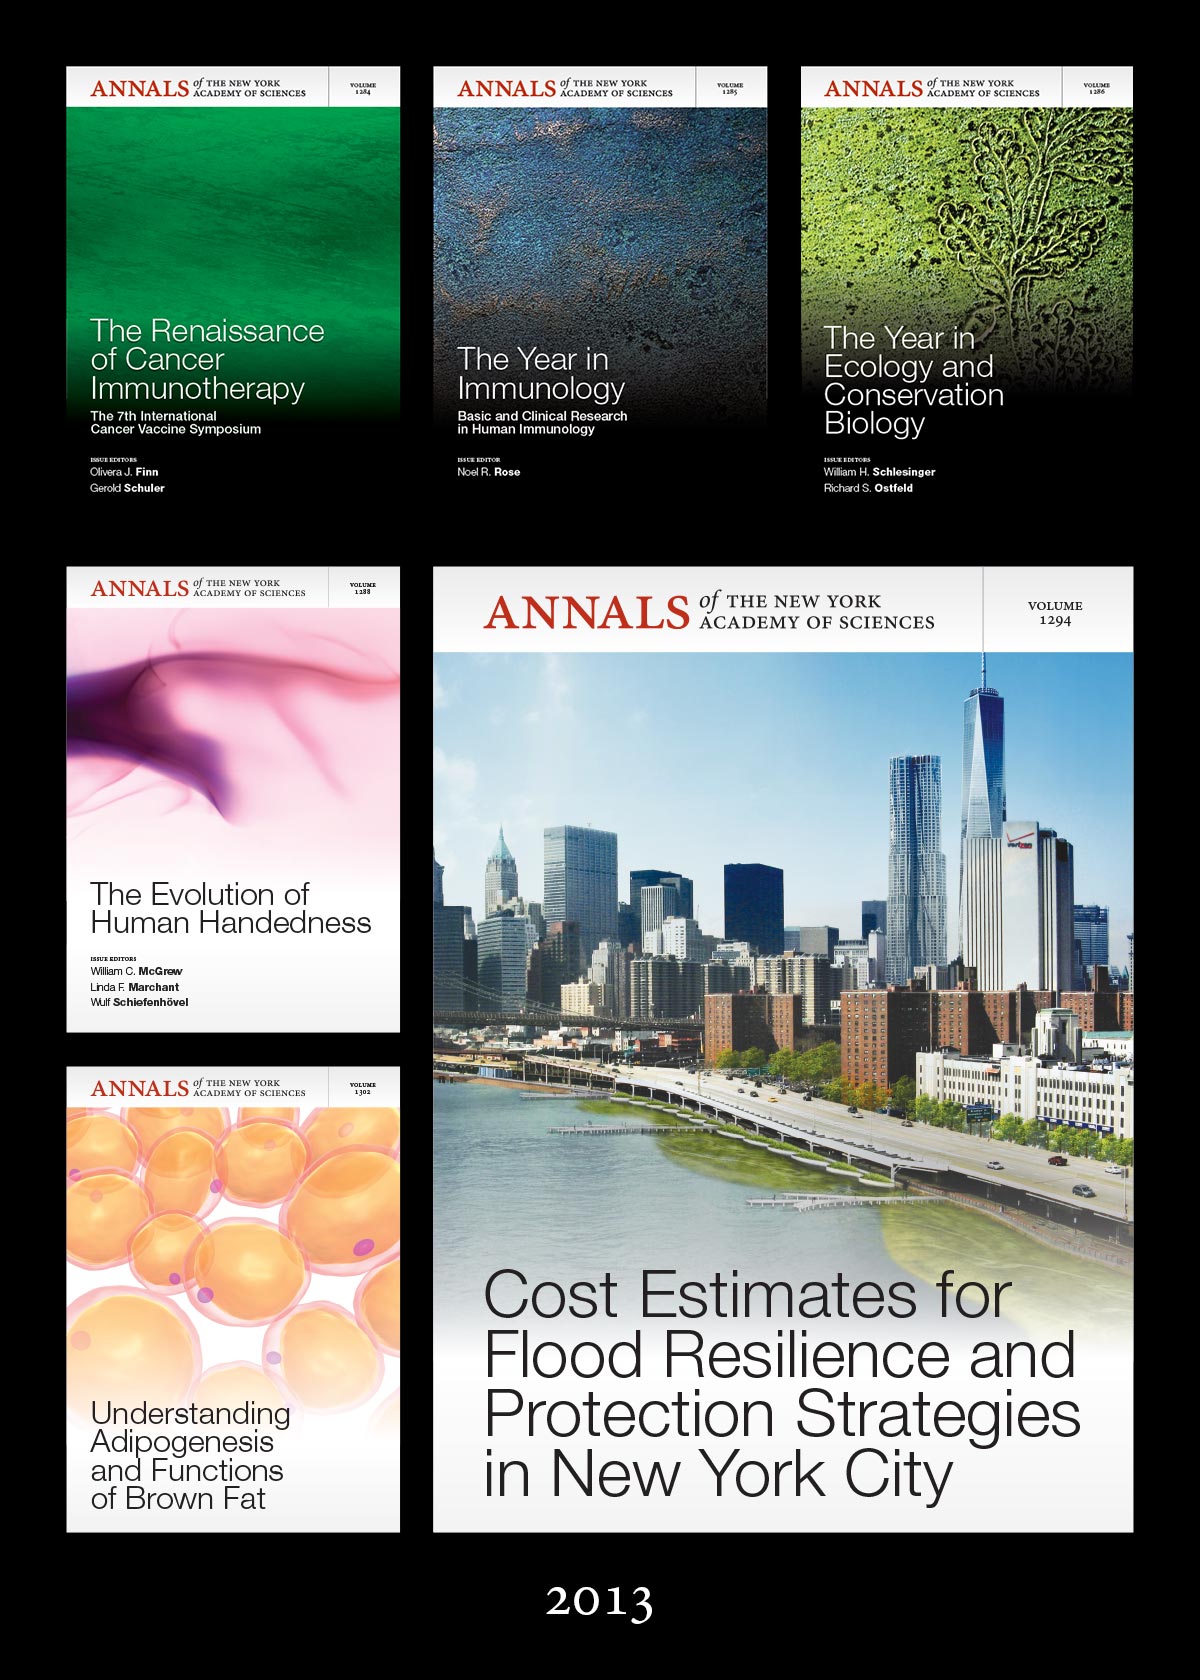 2013 covers